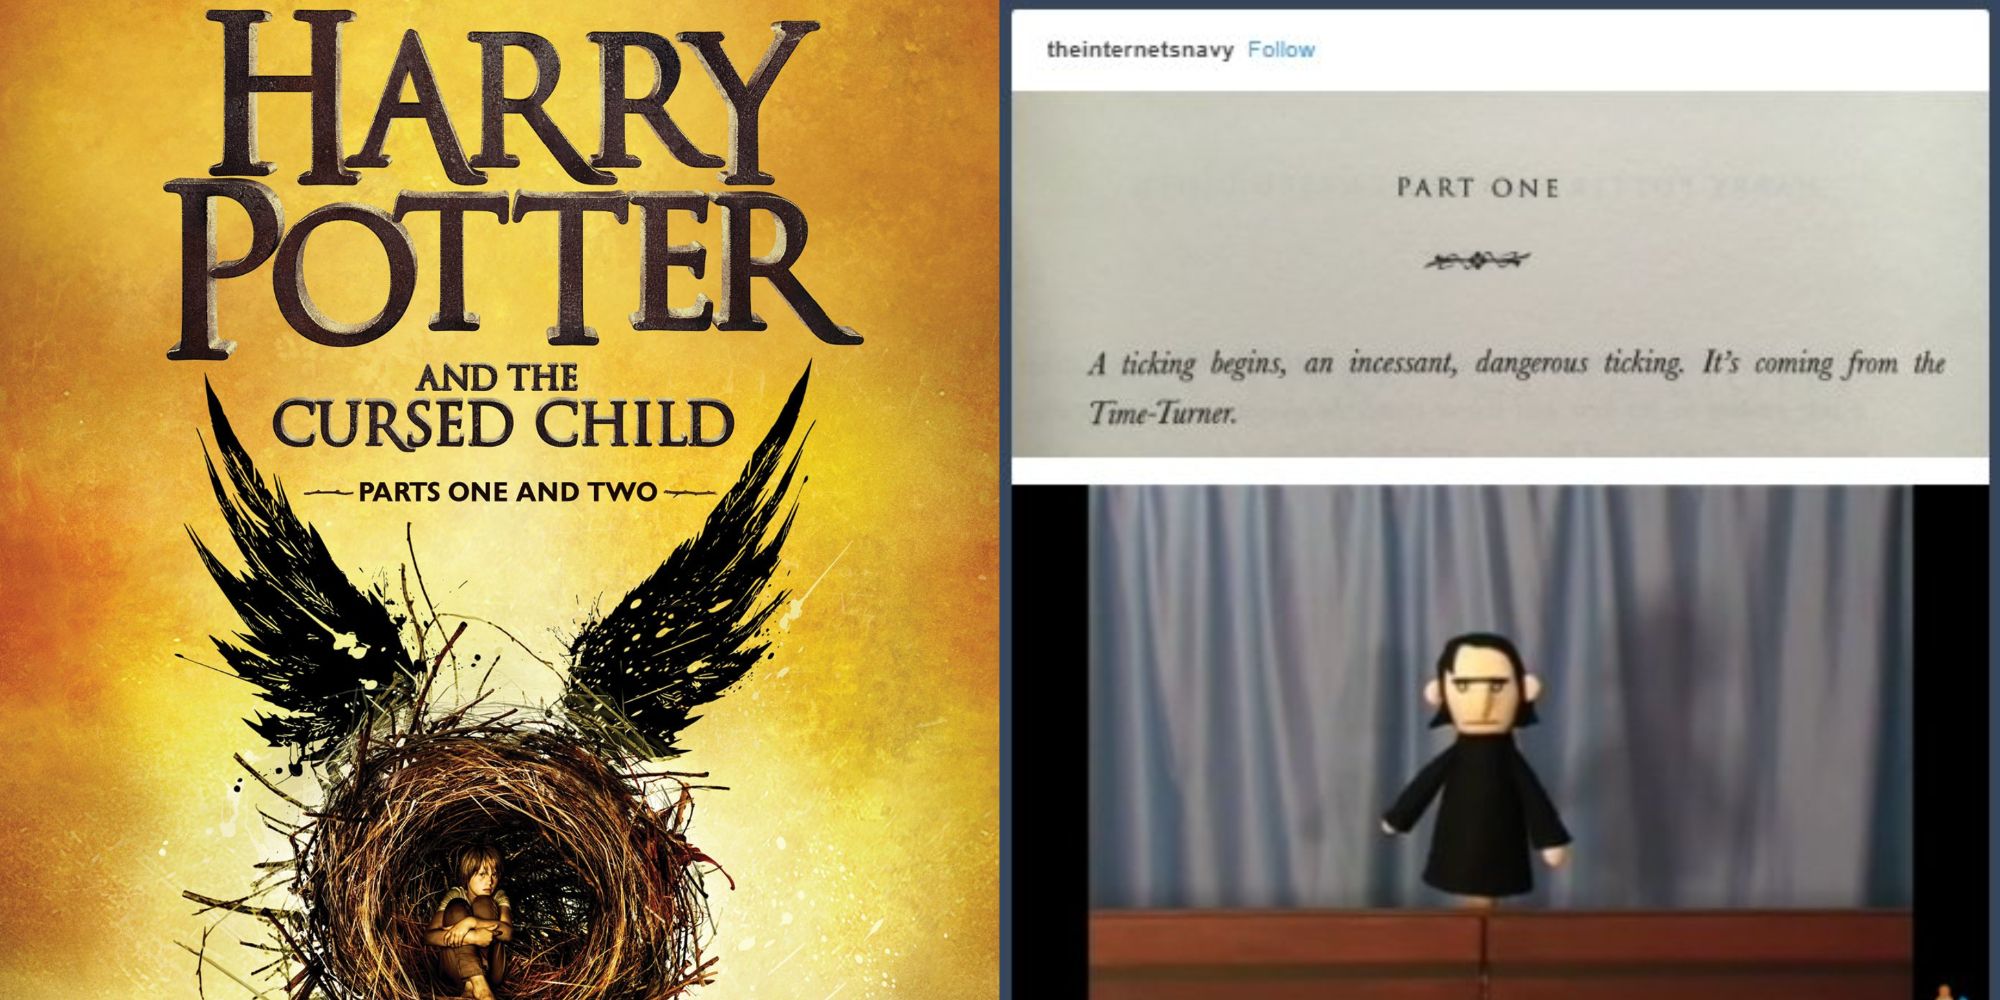 Split Image of The Cursed Child Cover (from Amazon.ca) and a Meme about The Cursed Child